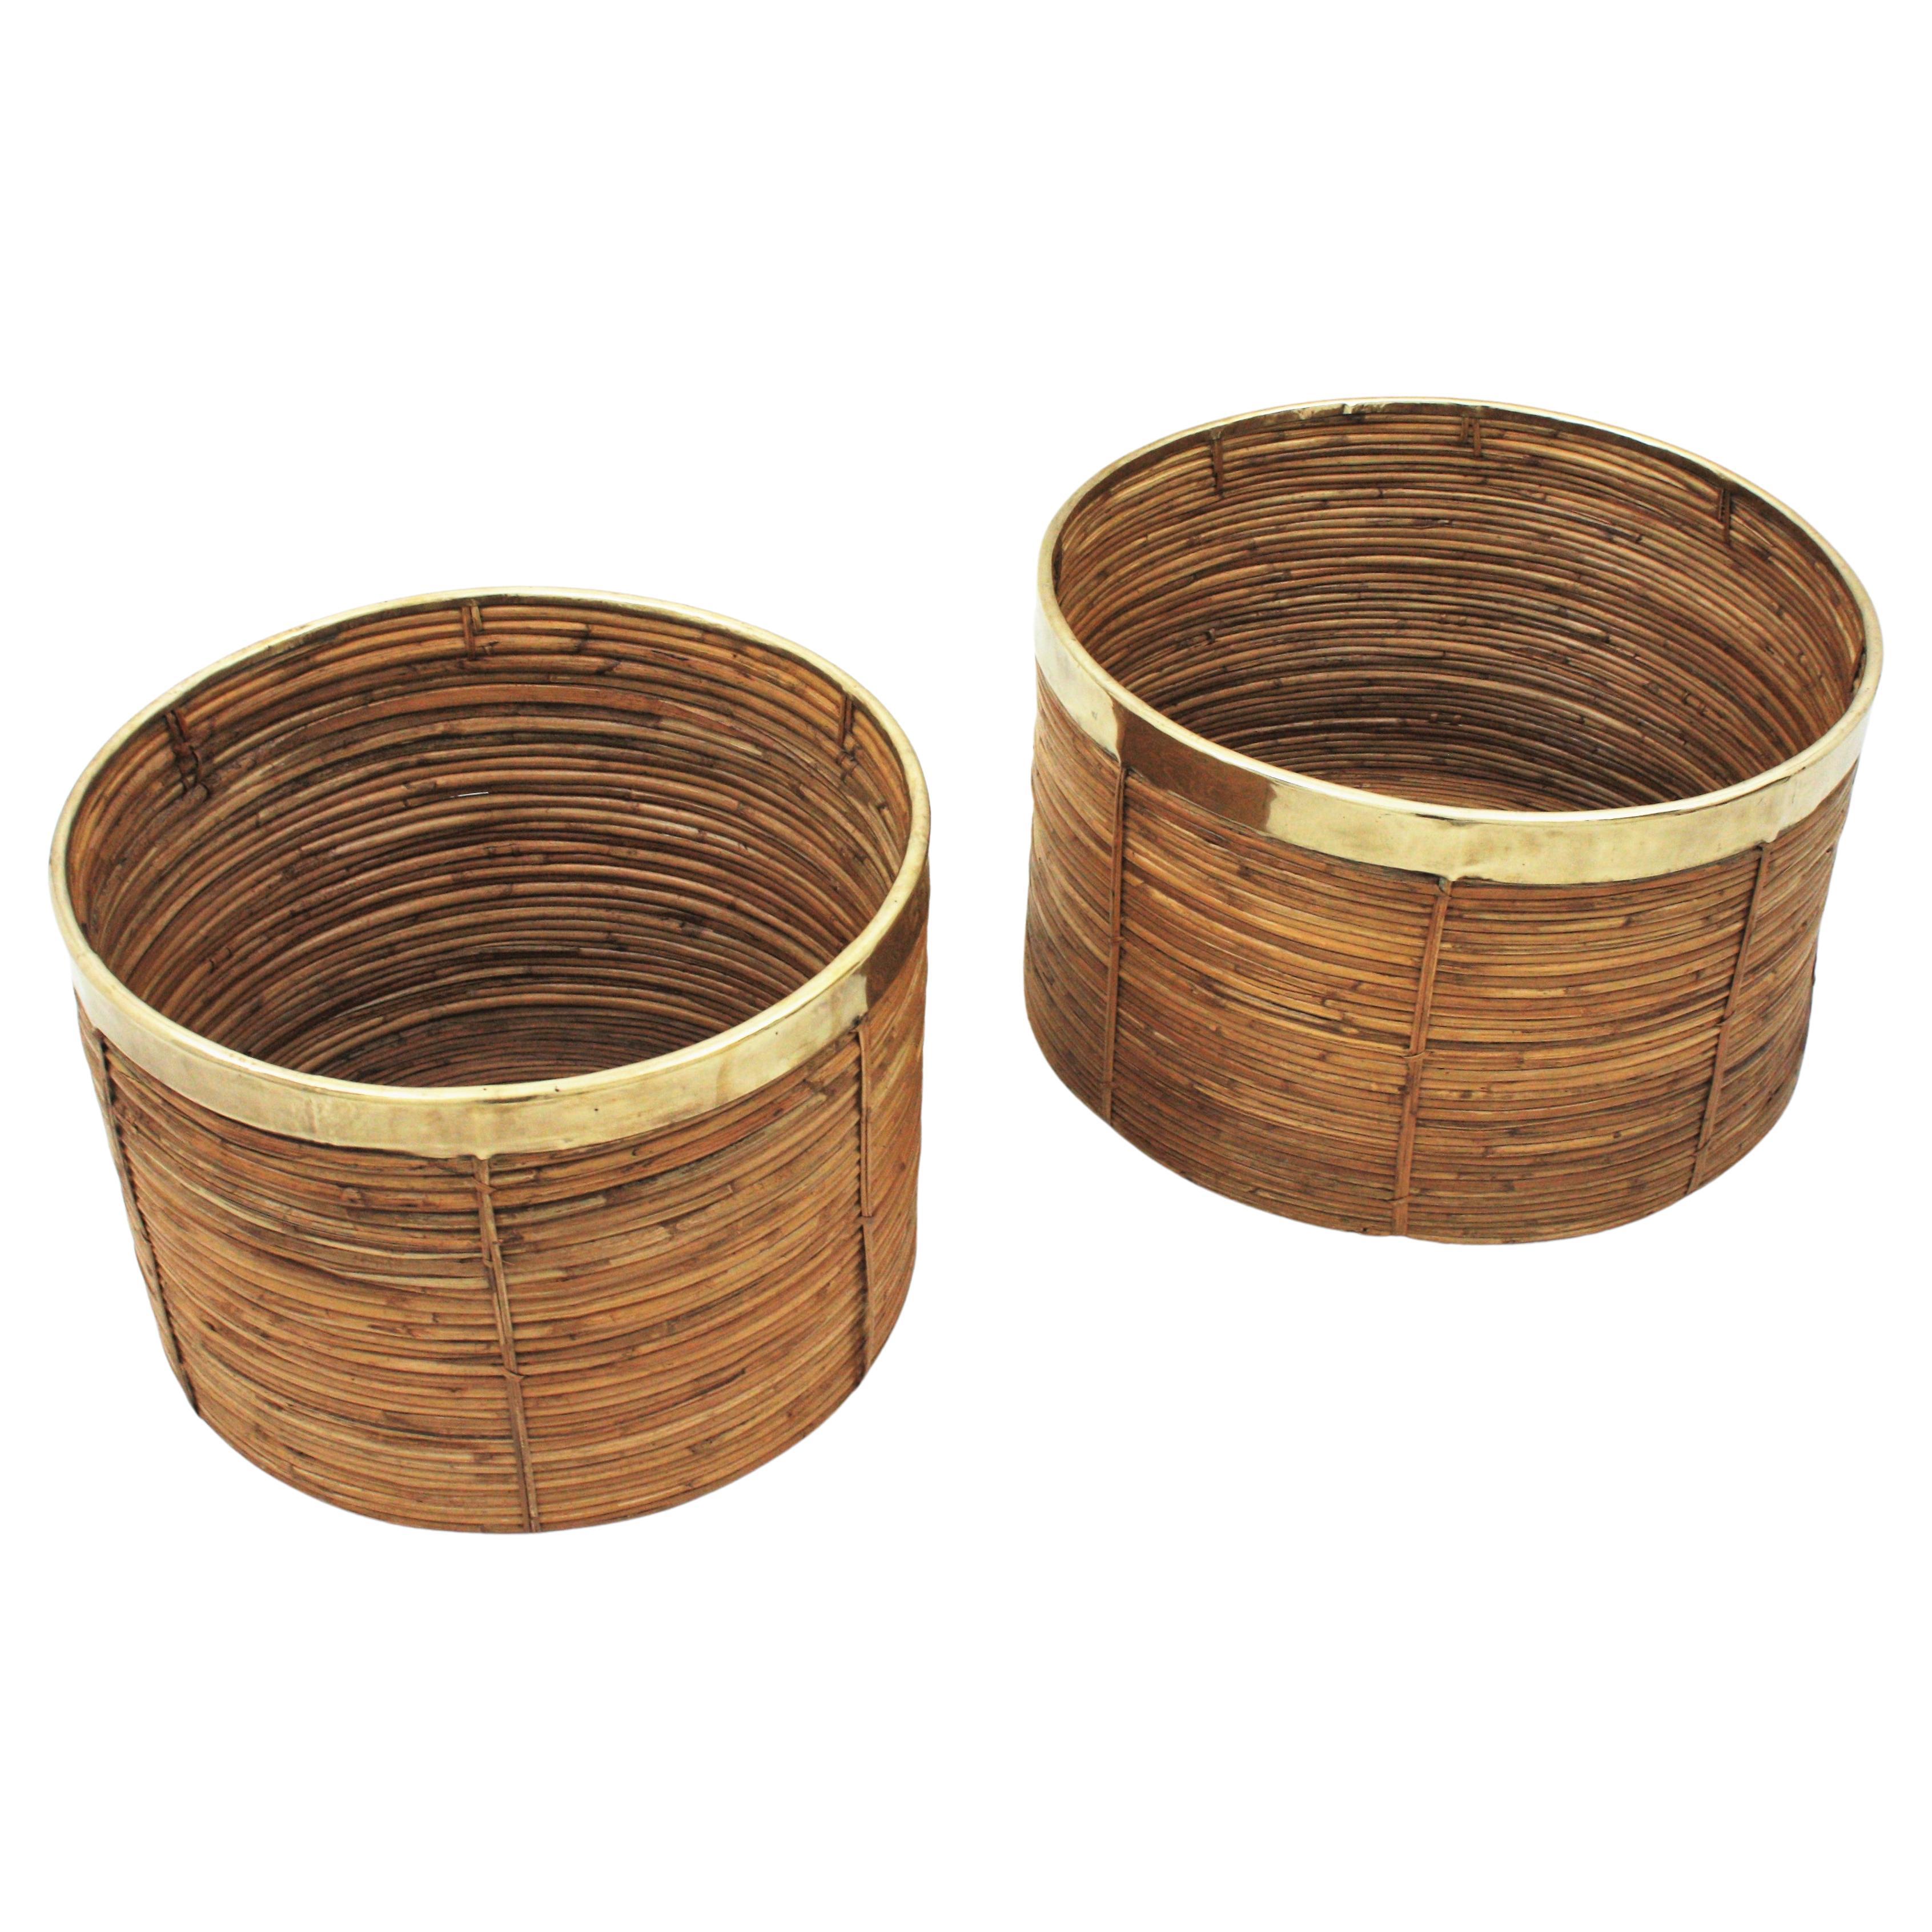 Pair of Extra Large Rattan Round Planters / Baskets with Brass Rim, Italy, 1970s